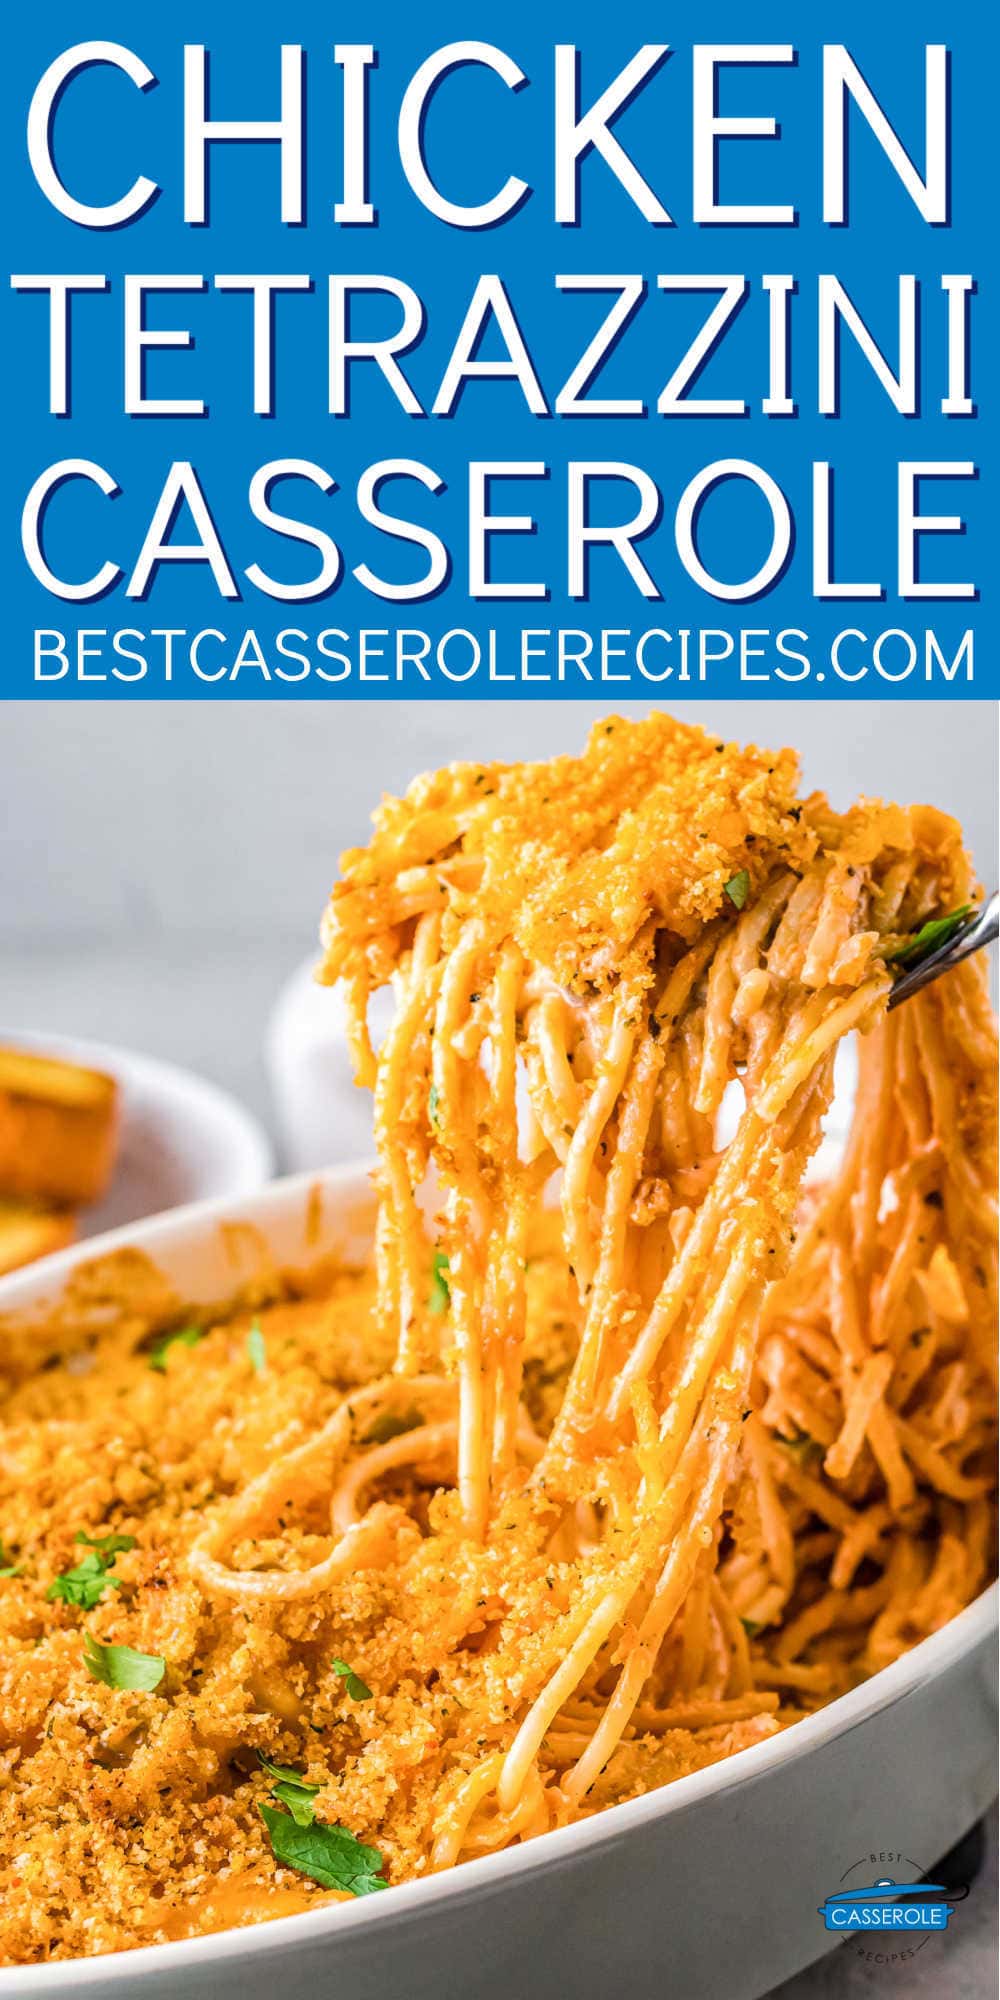 fork of pasta with text "chicken tetrazzini casserole"